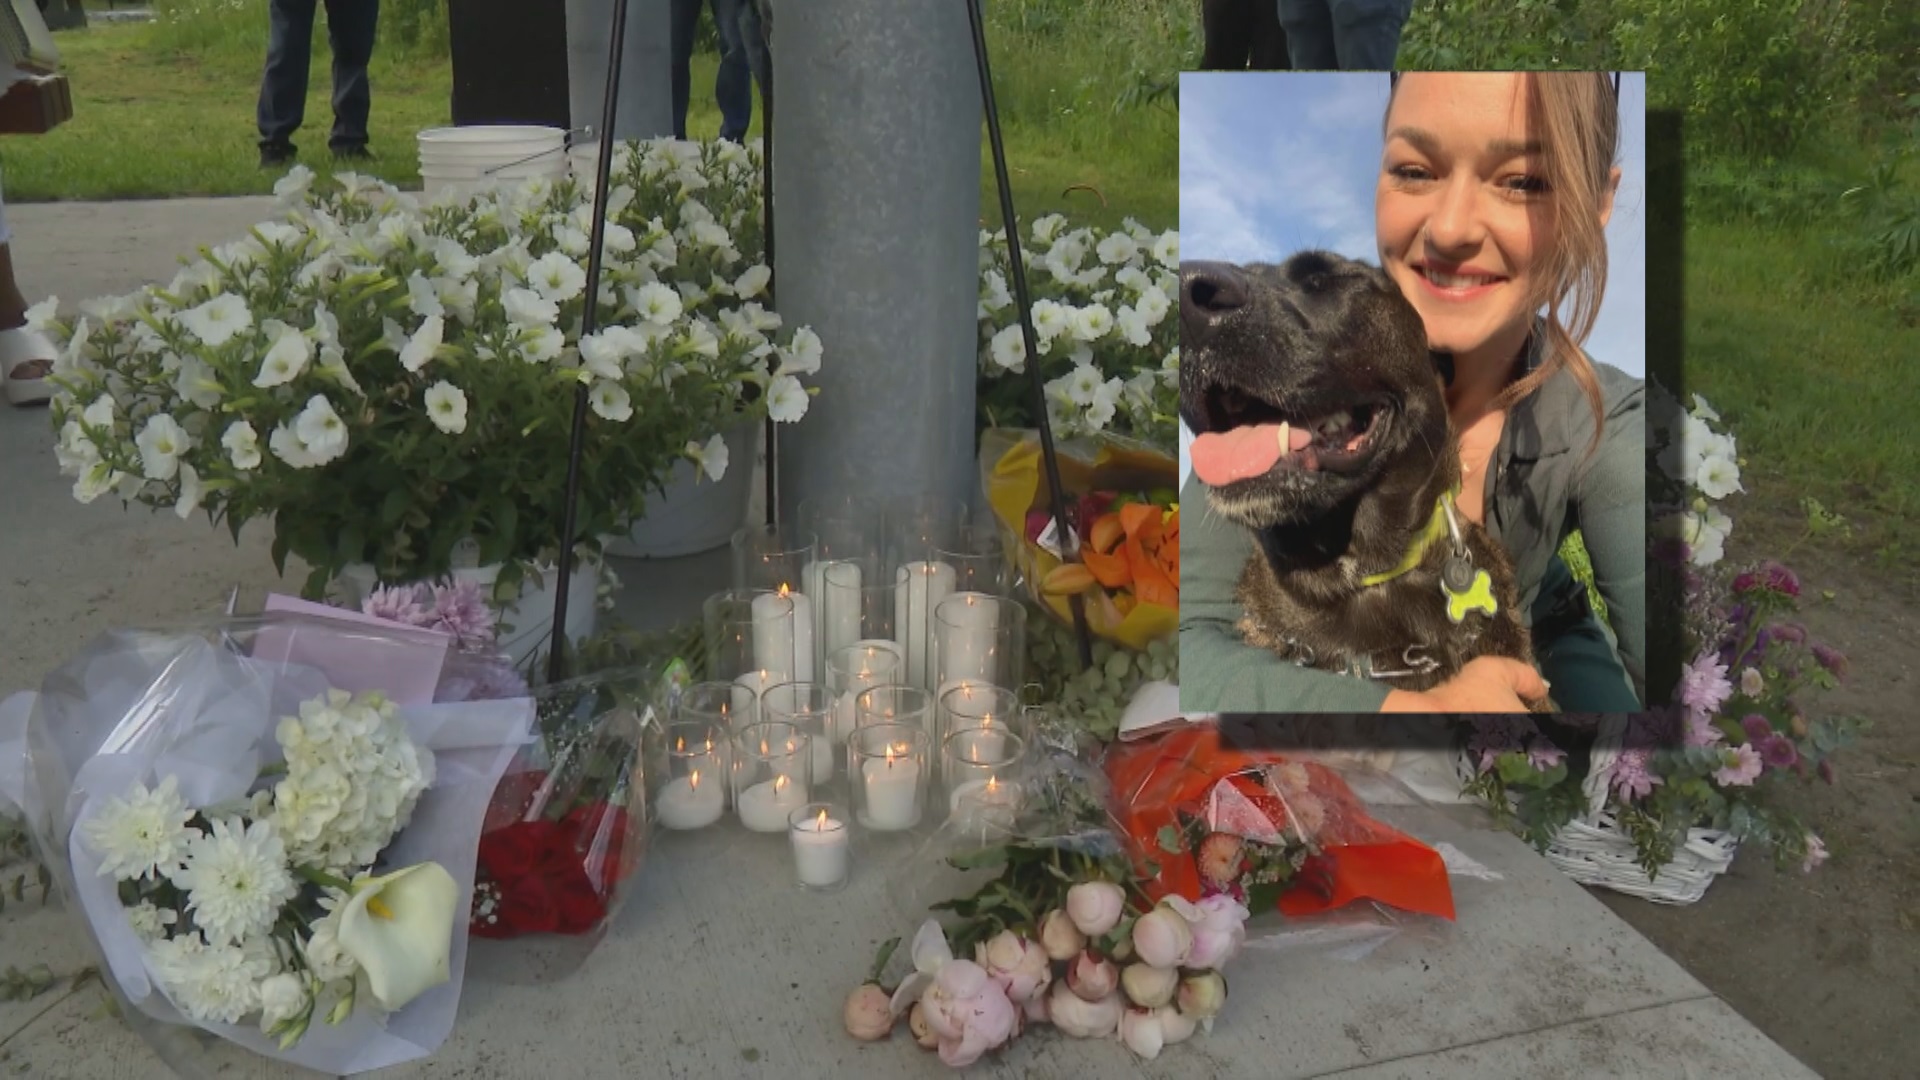 ‘This could have been anybody’s daughter’: Vigil held for Surrey homicide victim